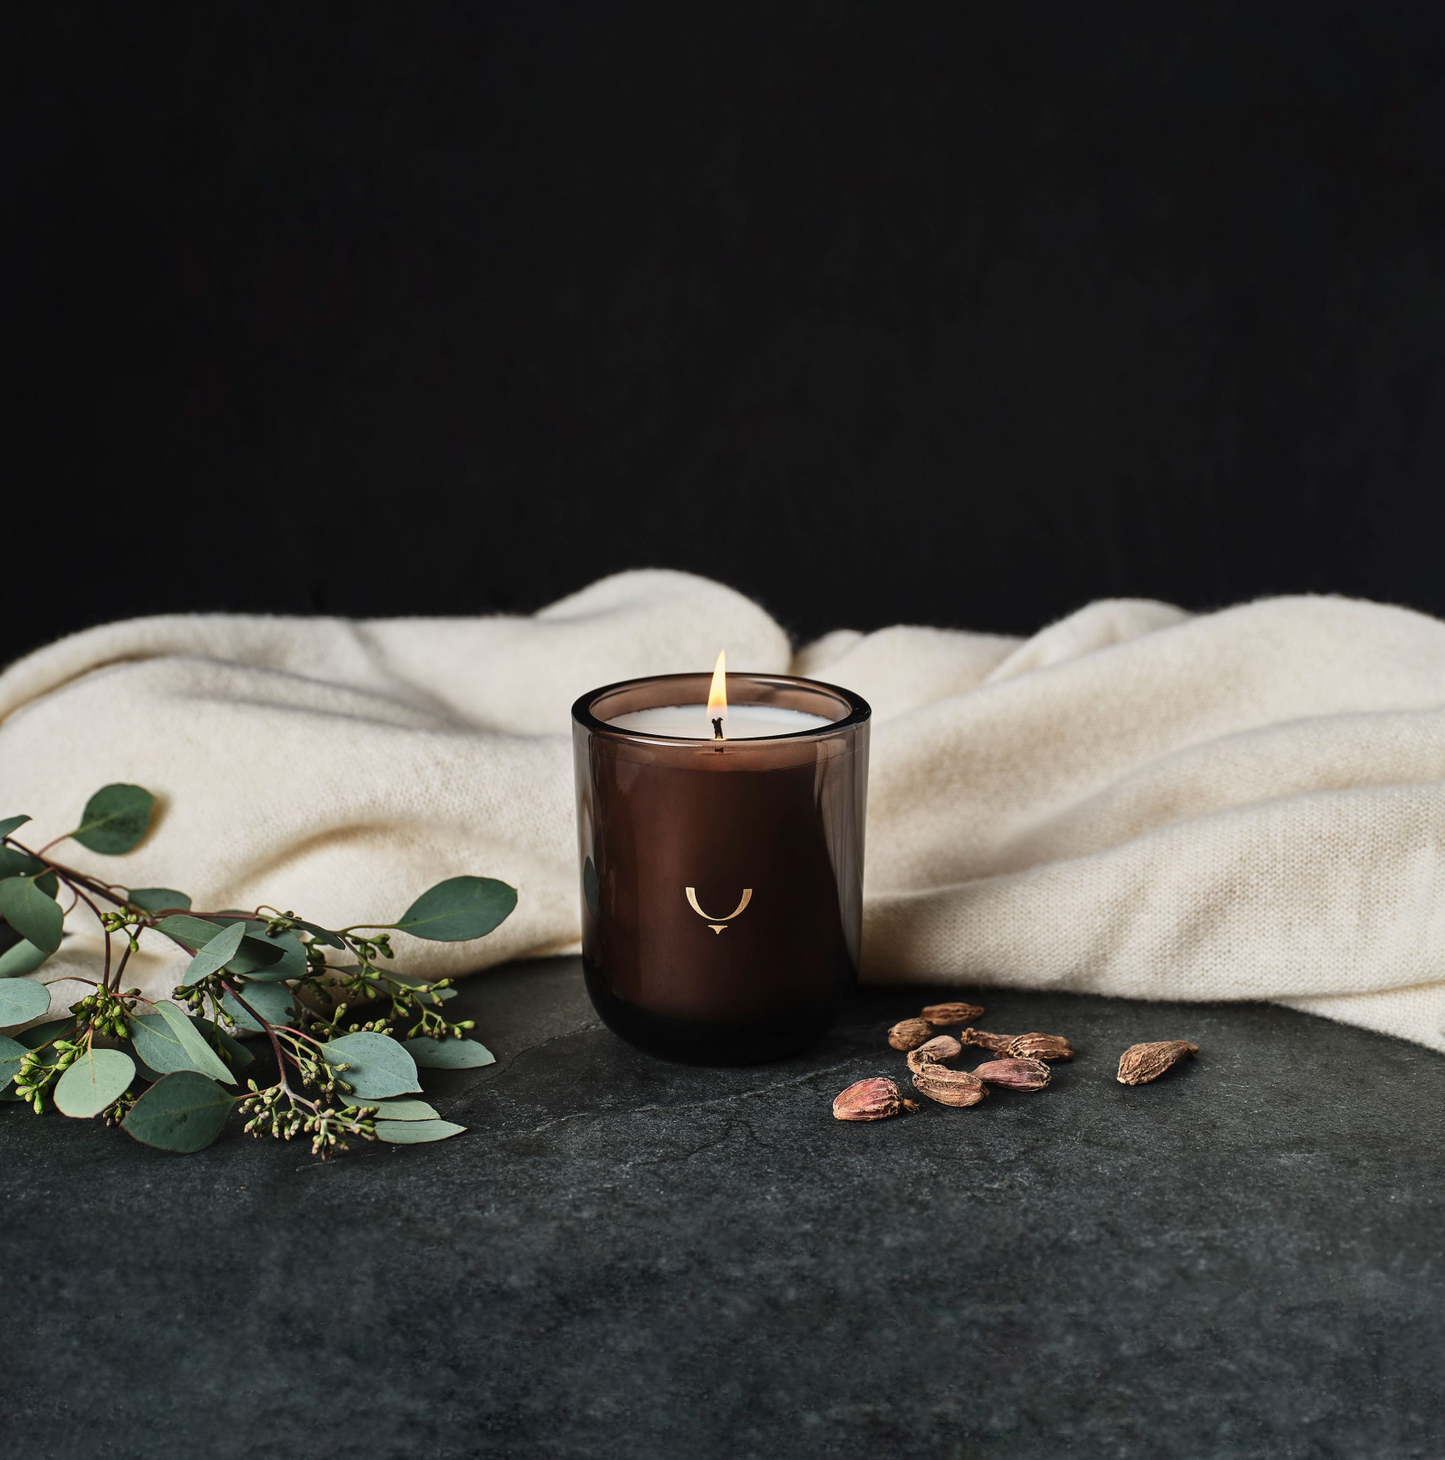 Lit candle in a setting with a white blanket, leaves and cardamon pods